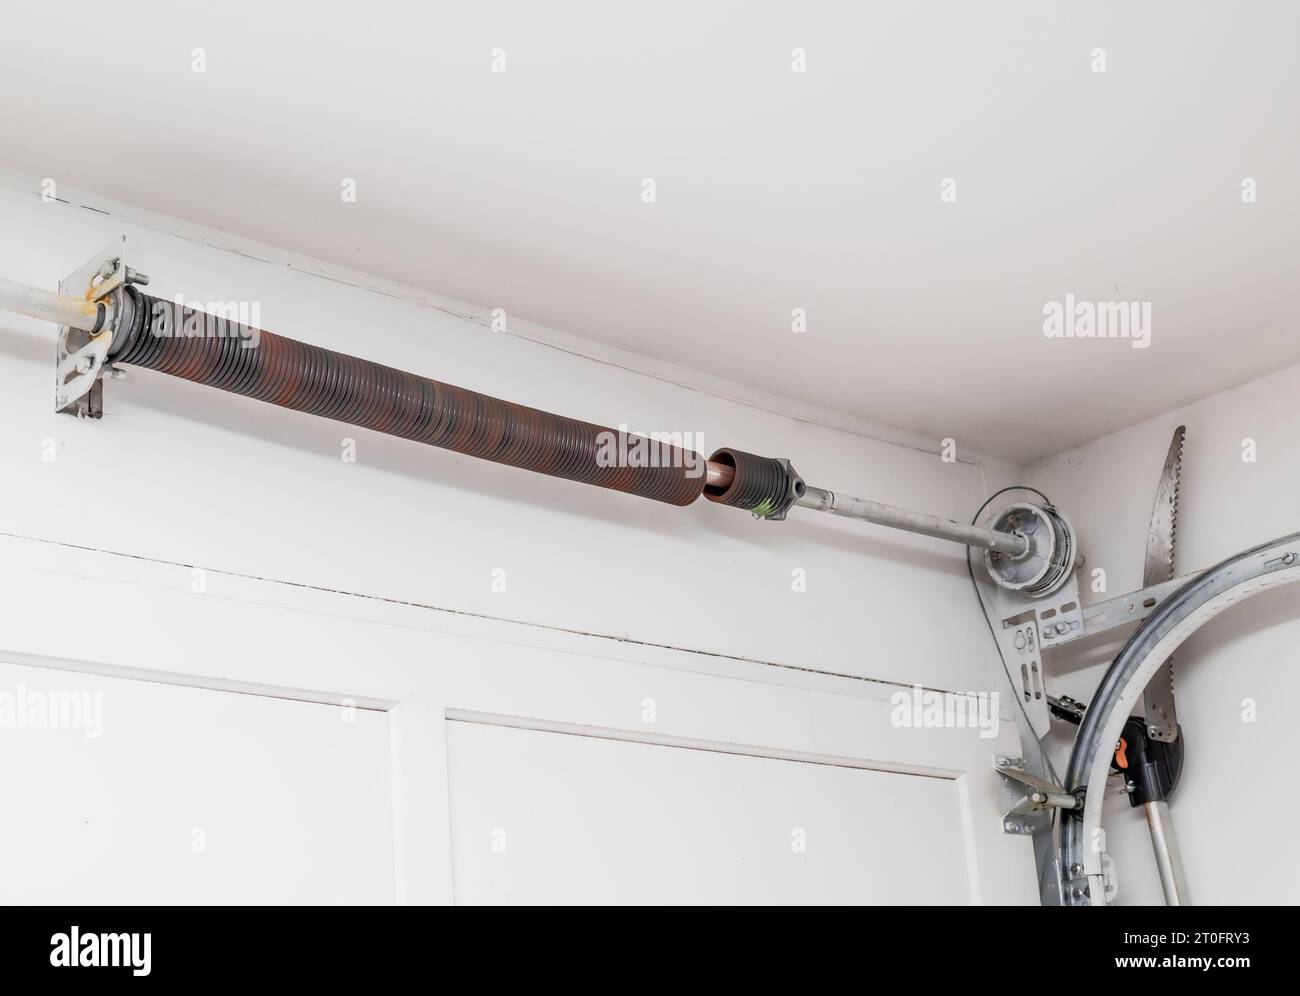 Broken garage door spring or torsion spring from overhead sectional door inside white garage. Sheared-off spring has reached lifespan cycles or materi Stock Photo